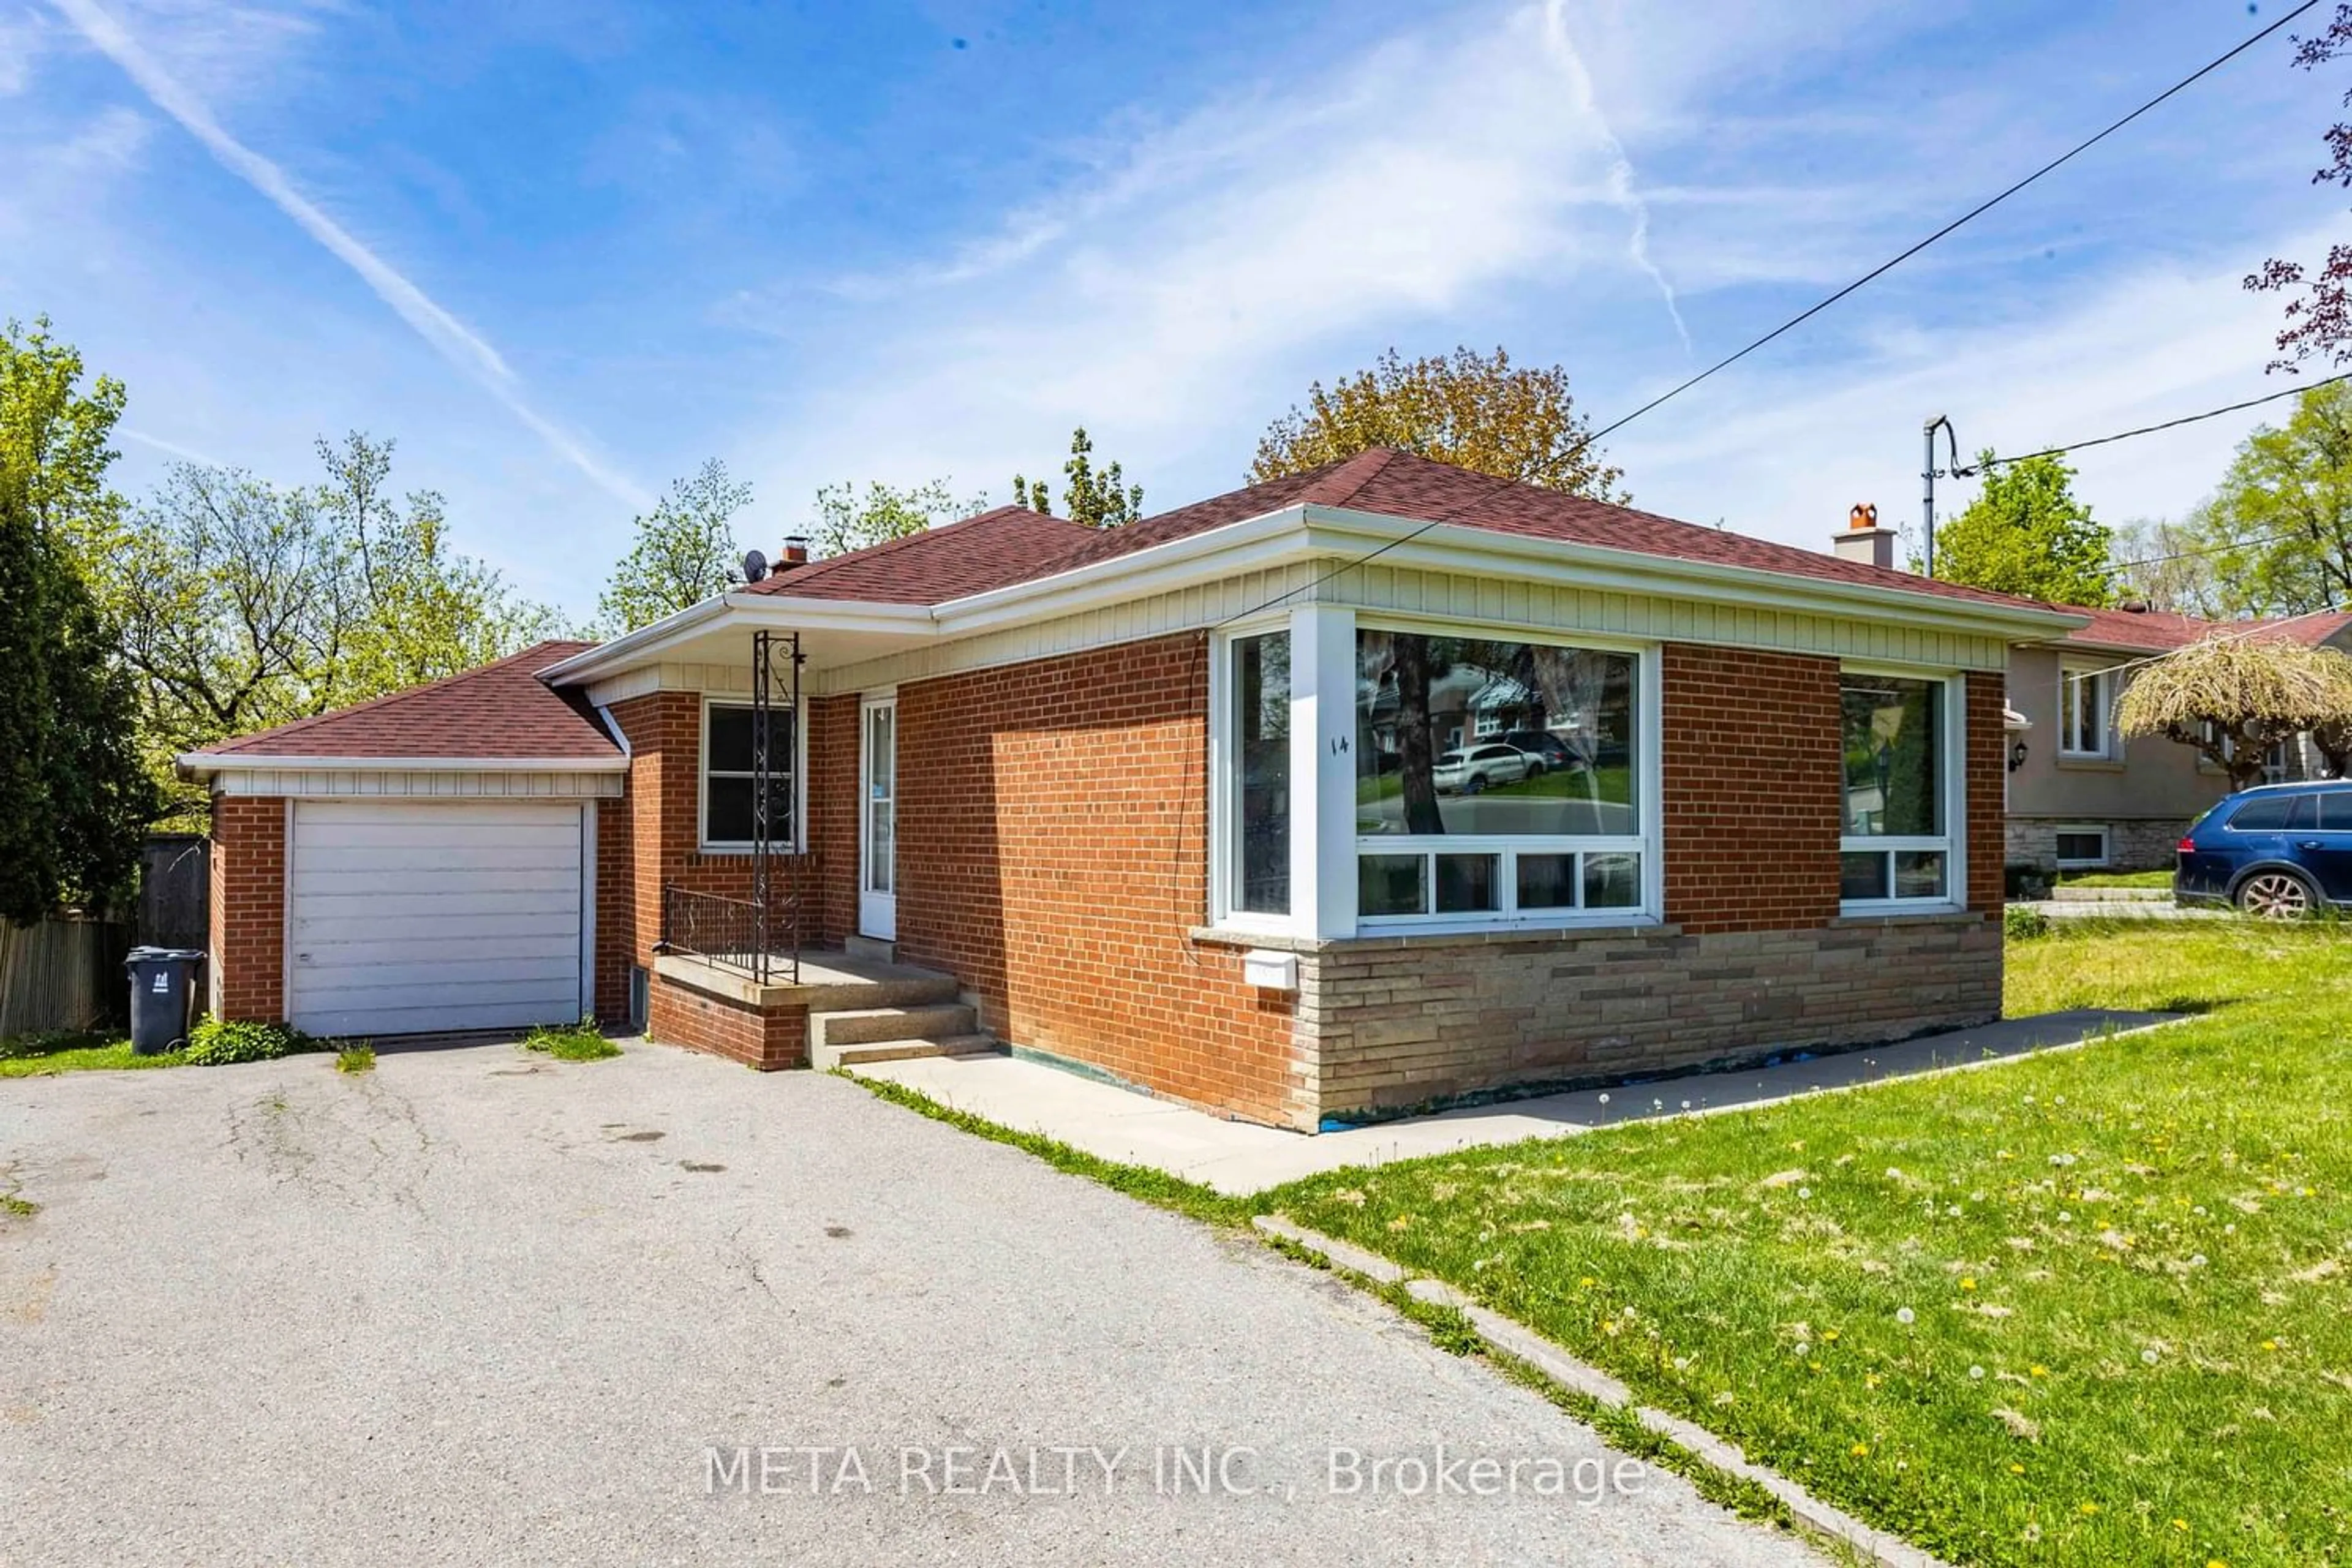 Home with brick exterior material for 14 Datchet Rd, Toronto Ontario M3M 1X5